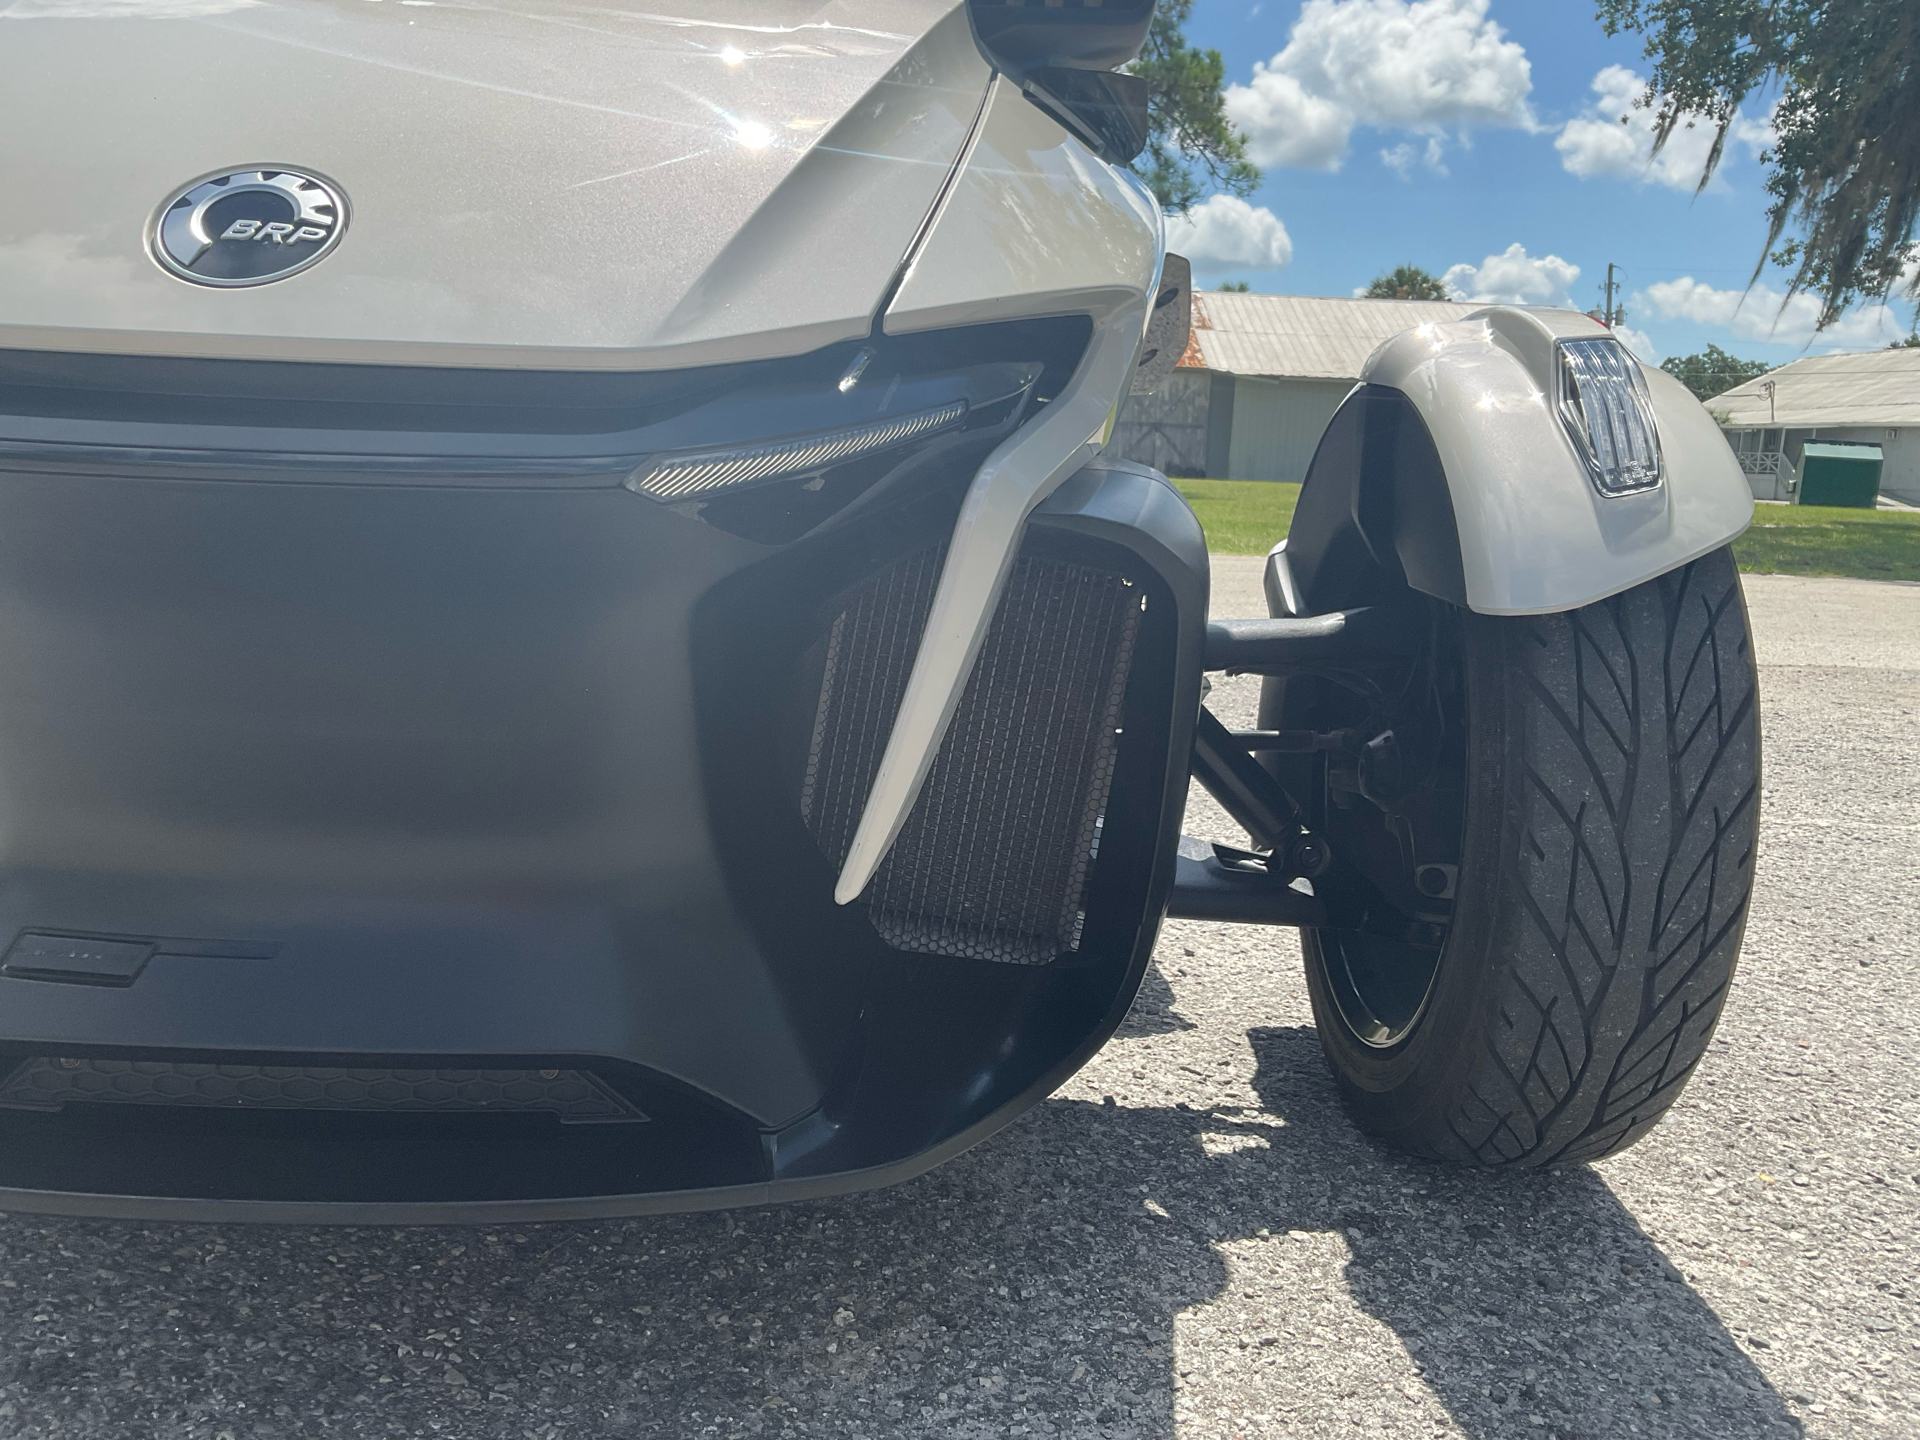 2020 Can-Am Spyder RT Limited in Sanford, Florida - Photo 16